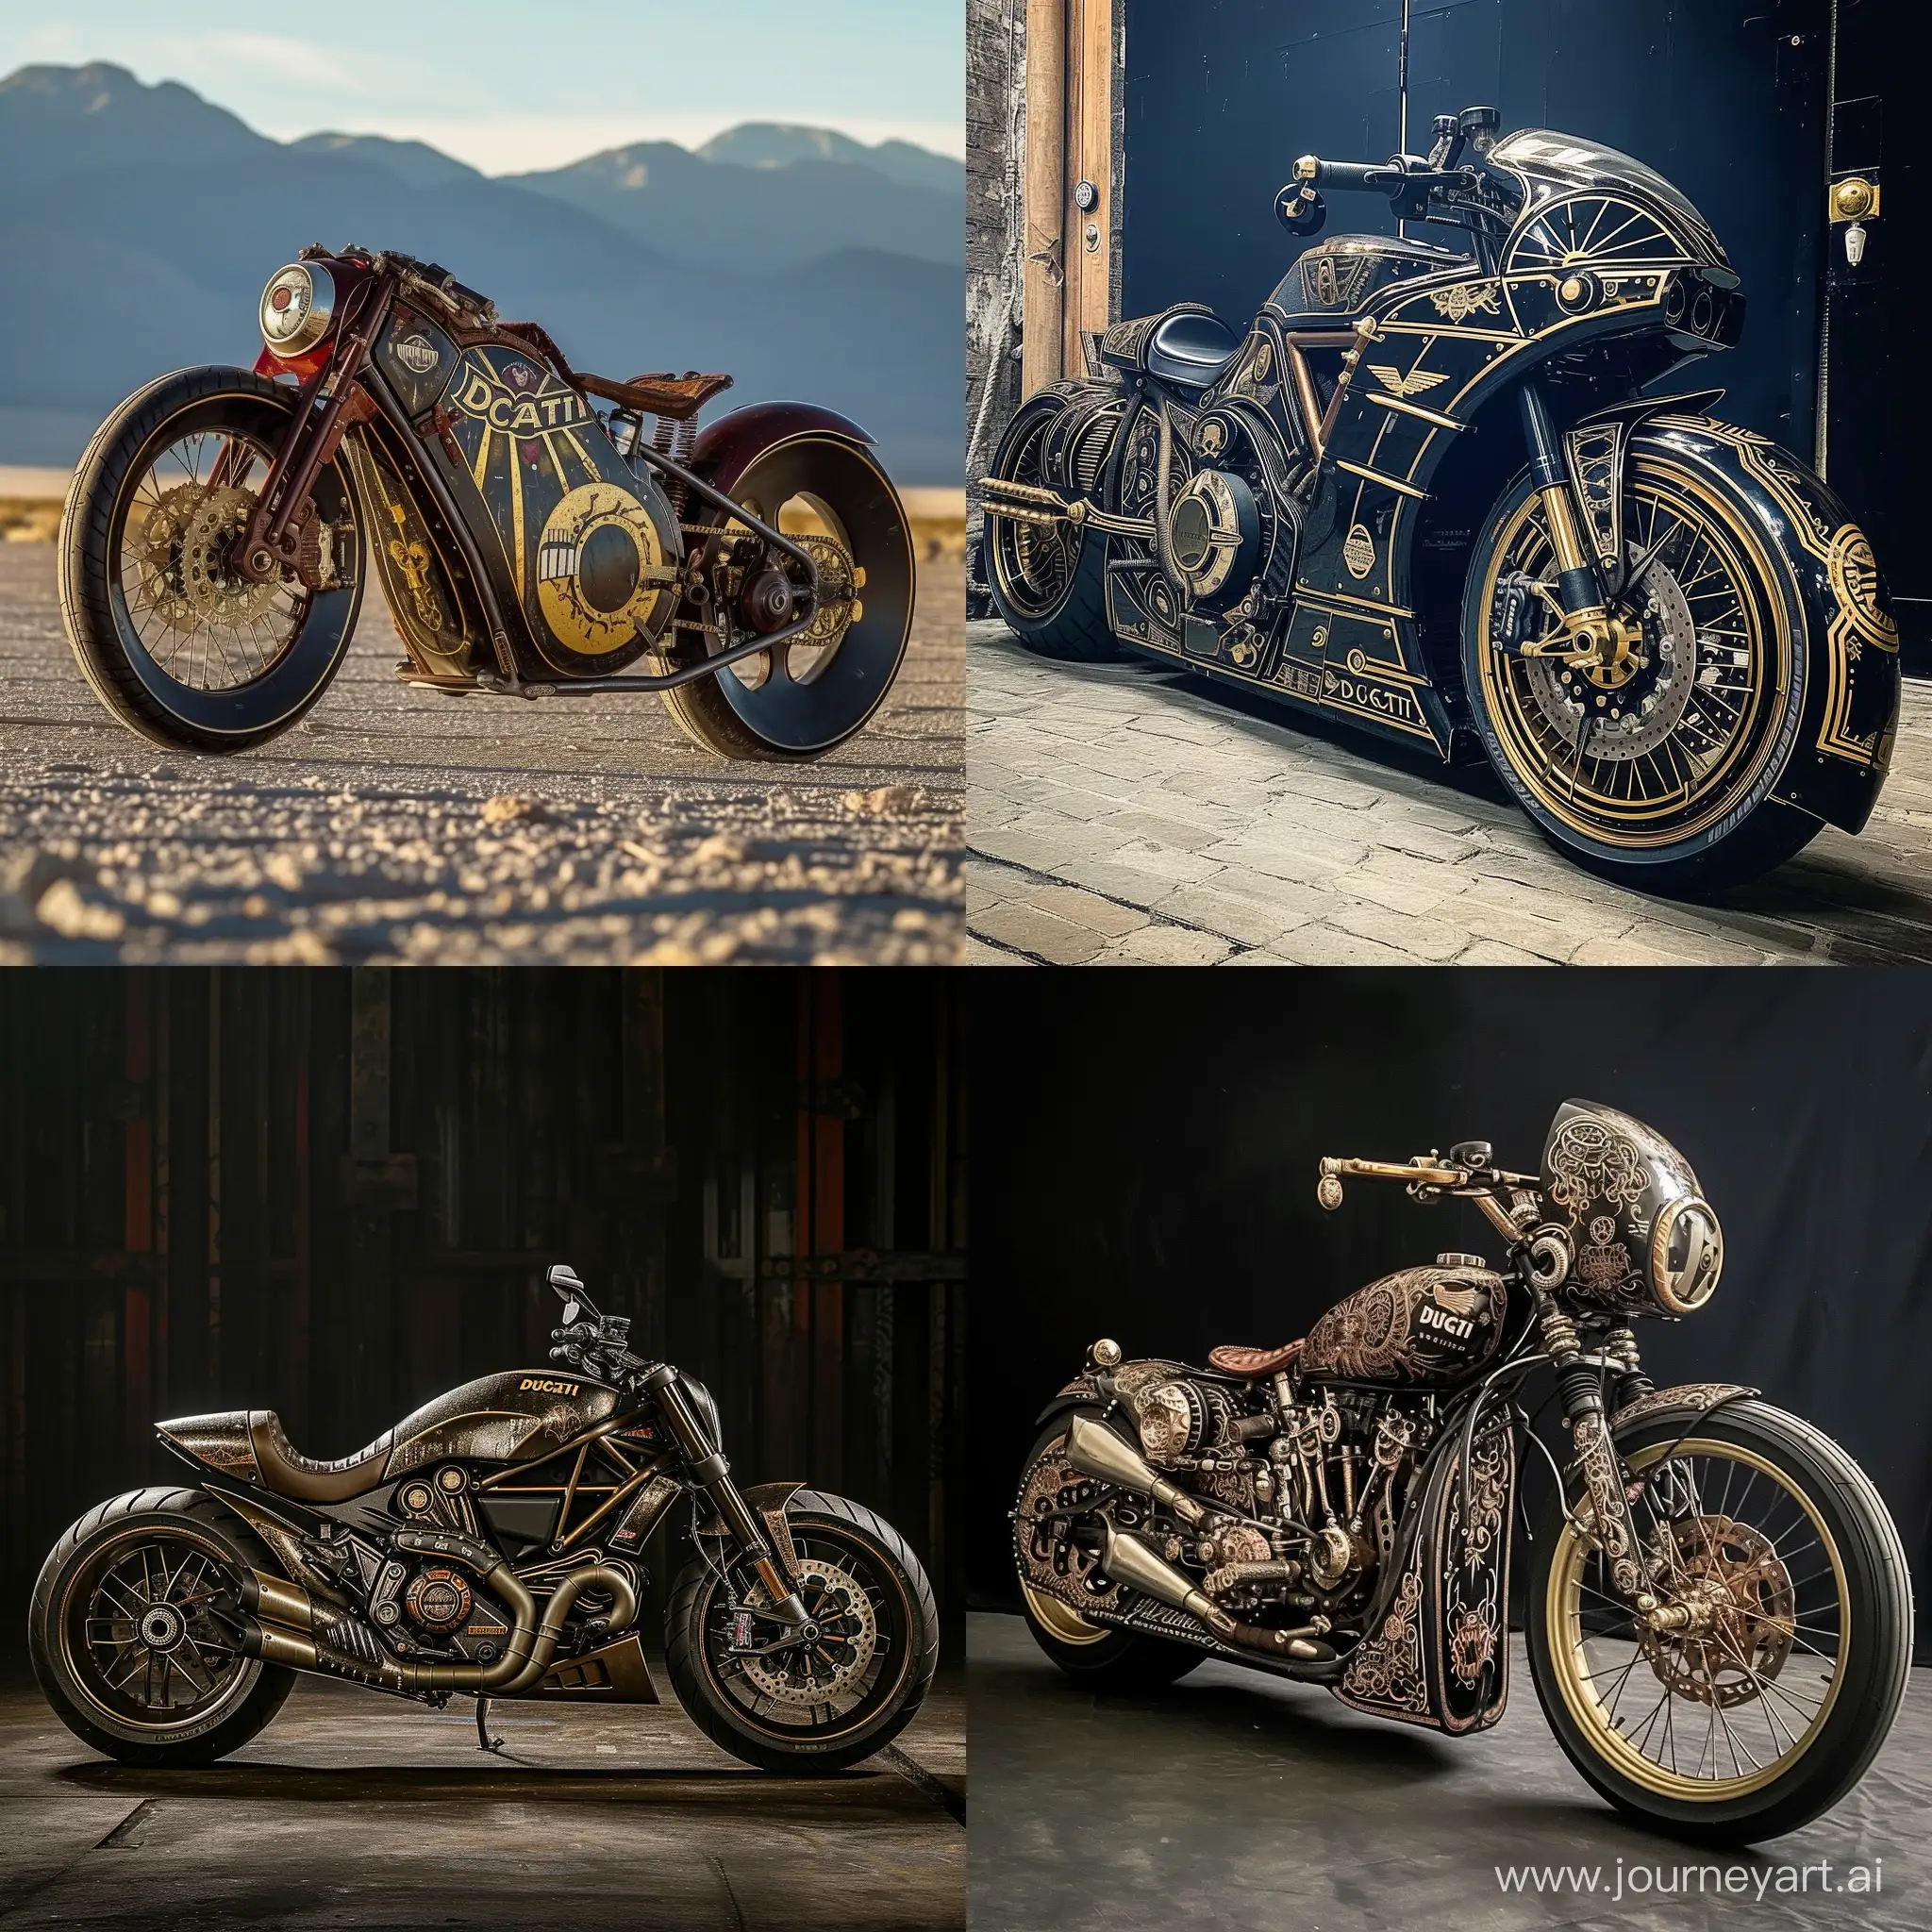 Make a Ducati mnotorcycle inspired by Mad Max and vintage circus elements in a art deco style